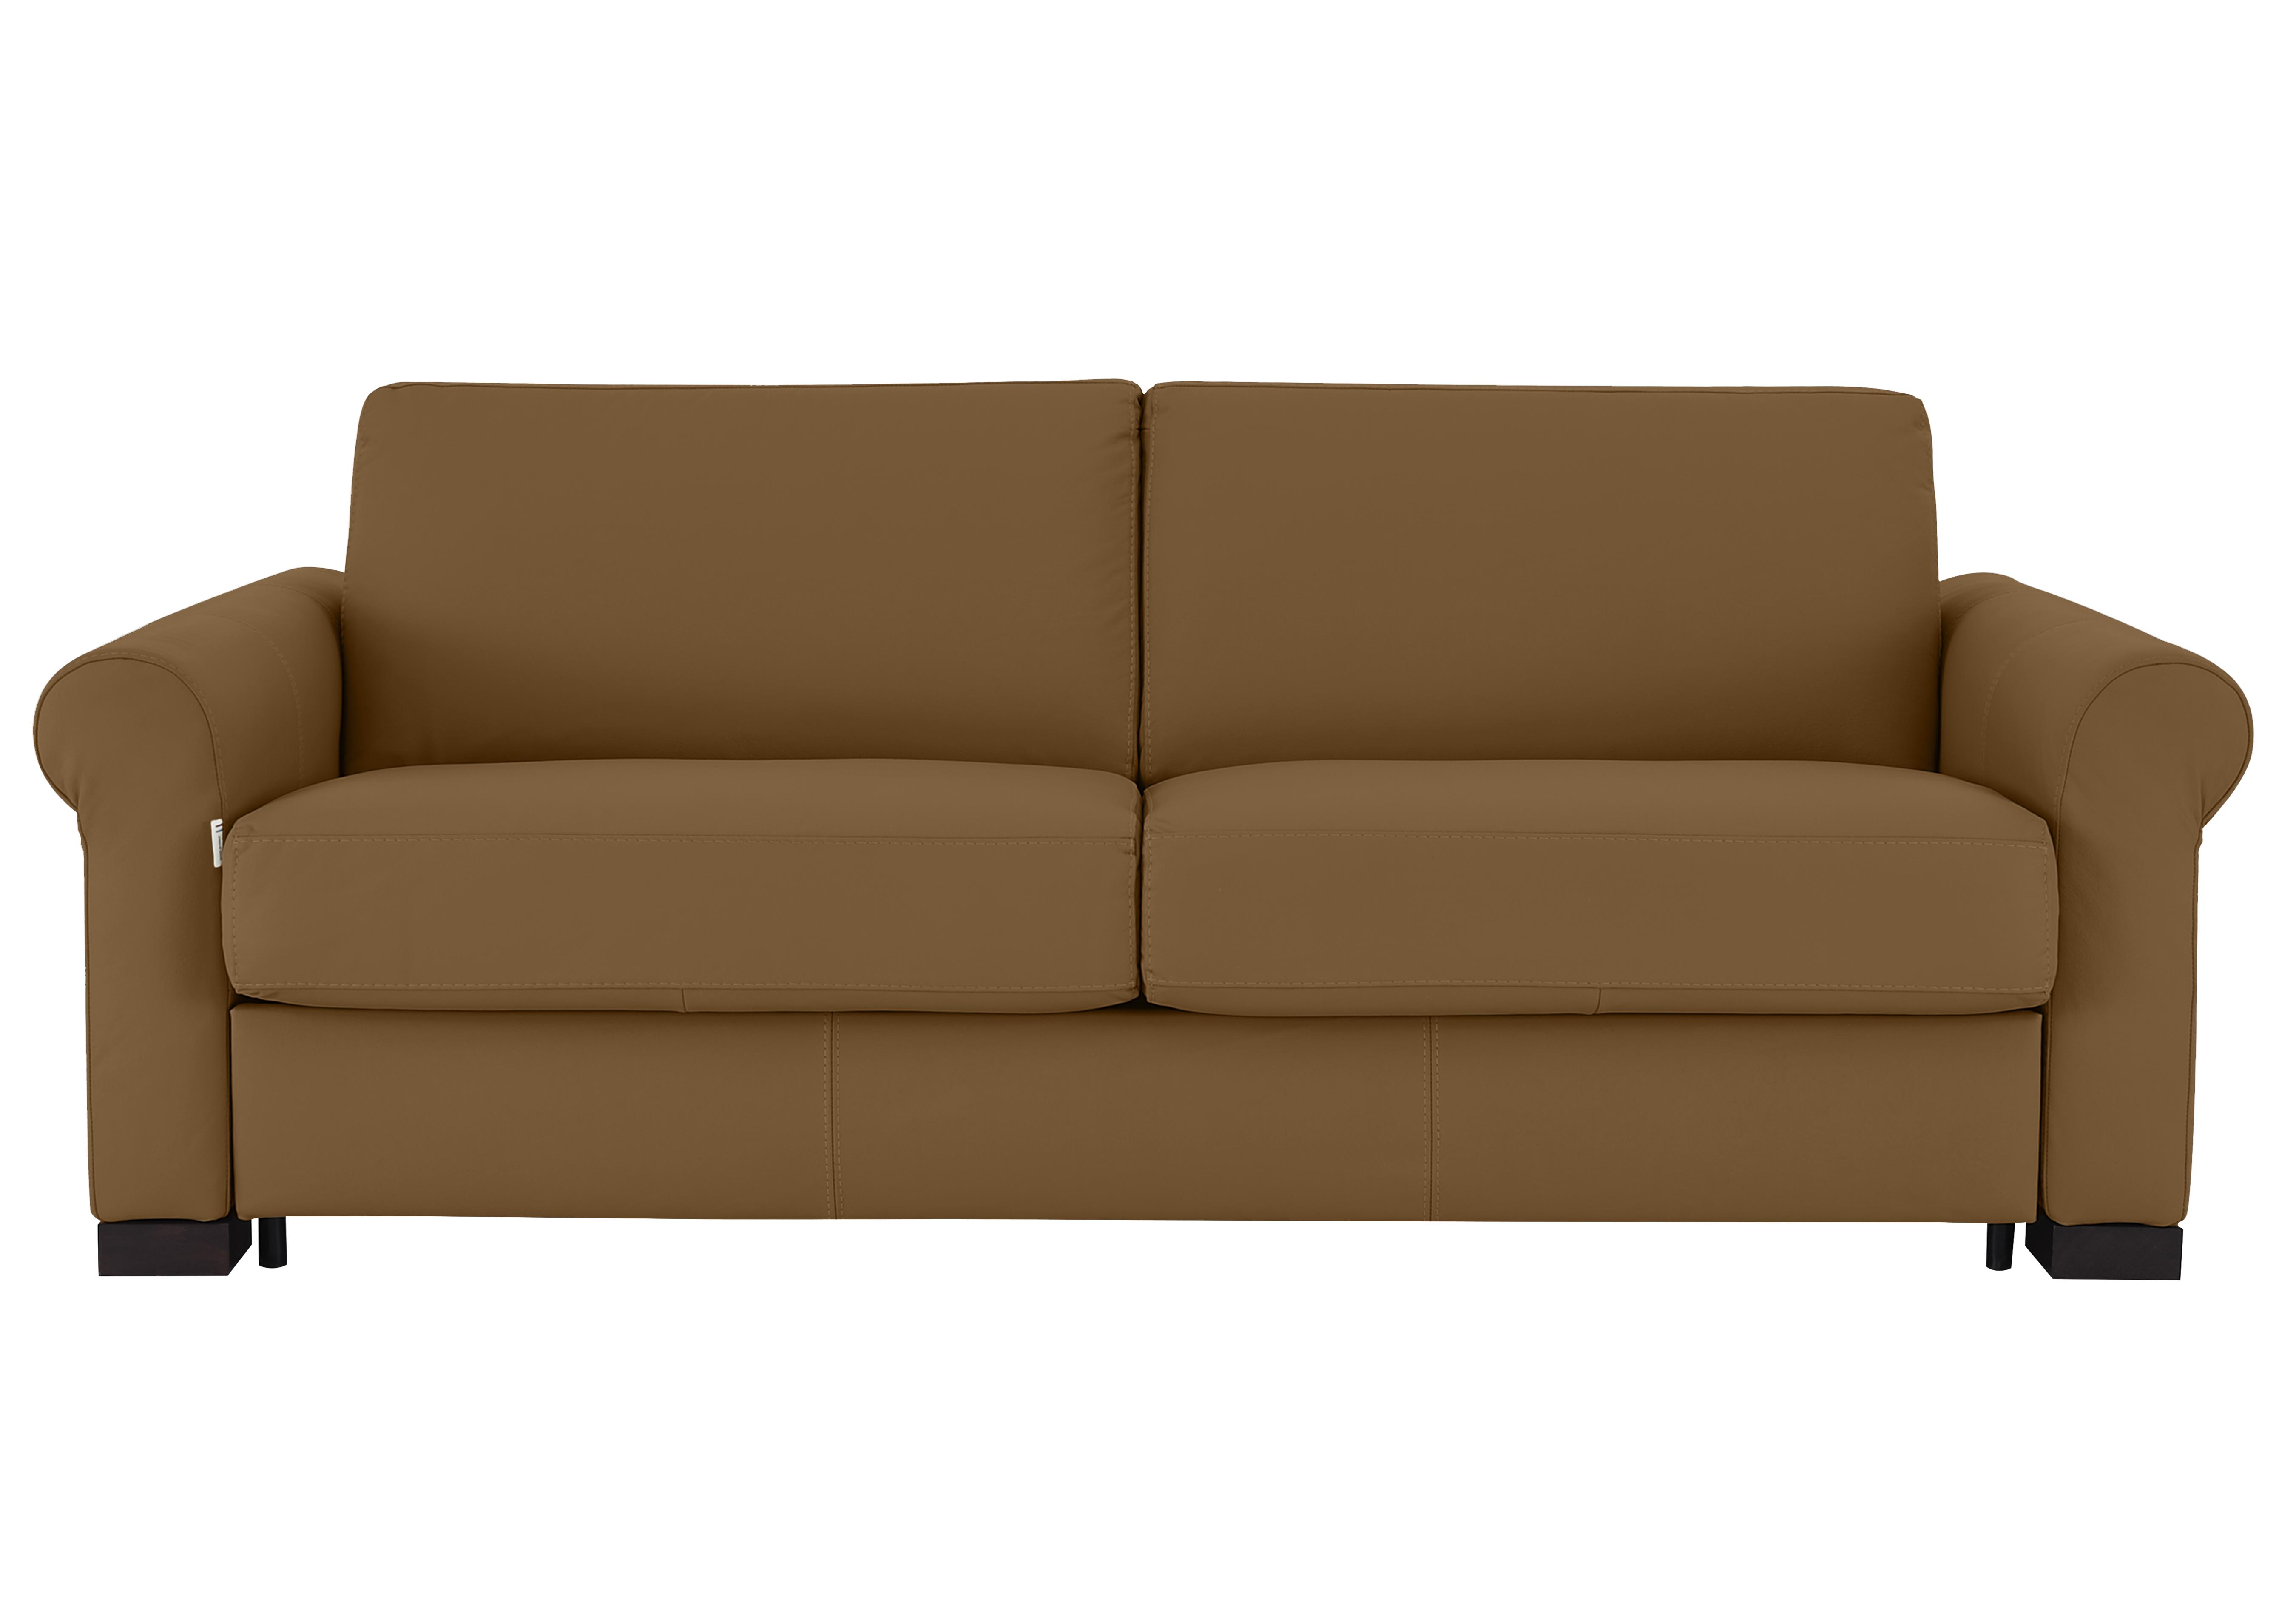 Alcova 3 Seater Leather Sofa Bed with Scroll Arms in Botero Cuoio 2151 on Furniture Village